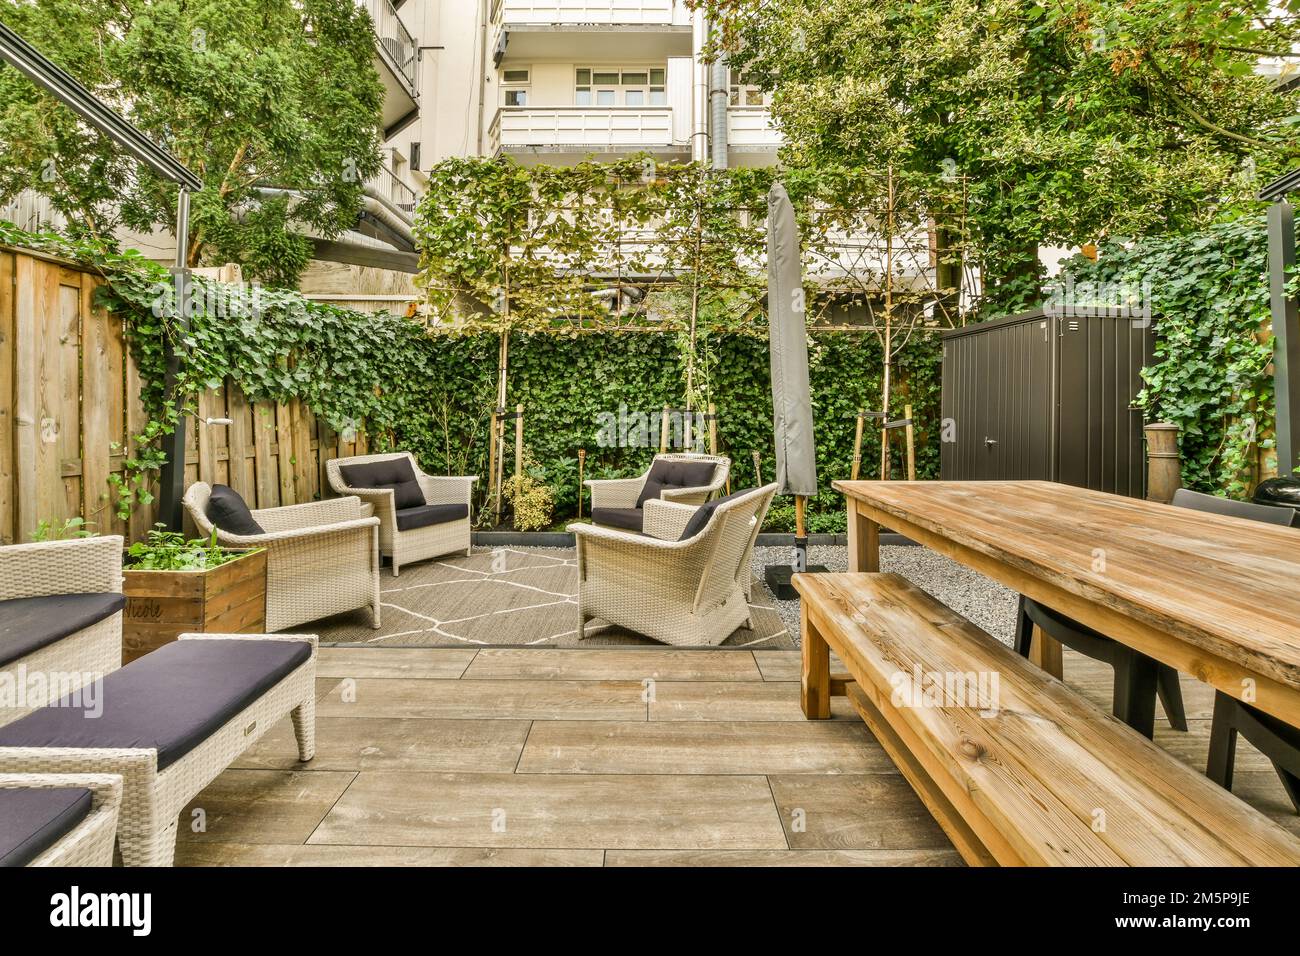 an outdoor patio with wooden furniture and plants on the walls, along with a bench in the middle part of the area Stock Photo